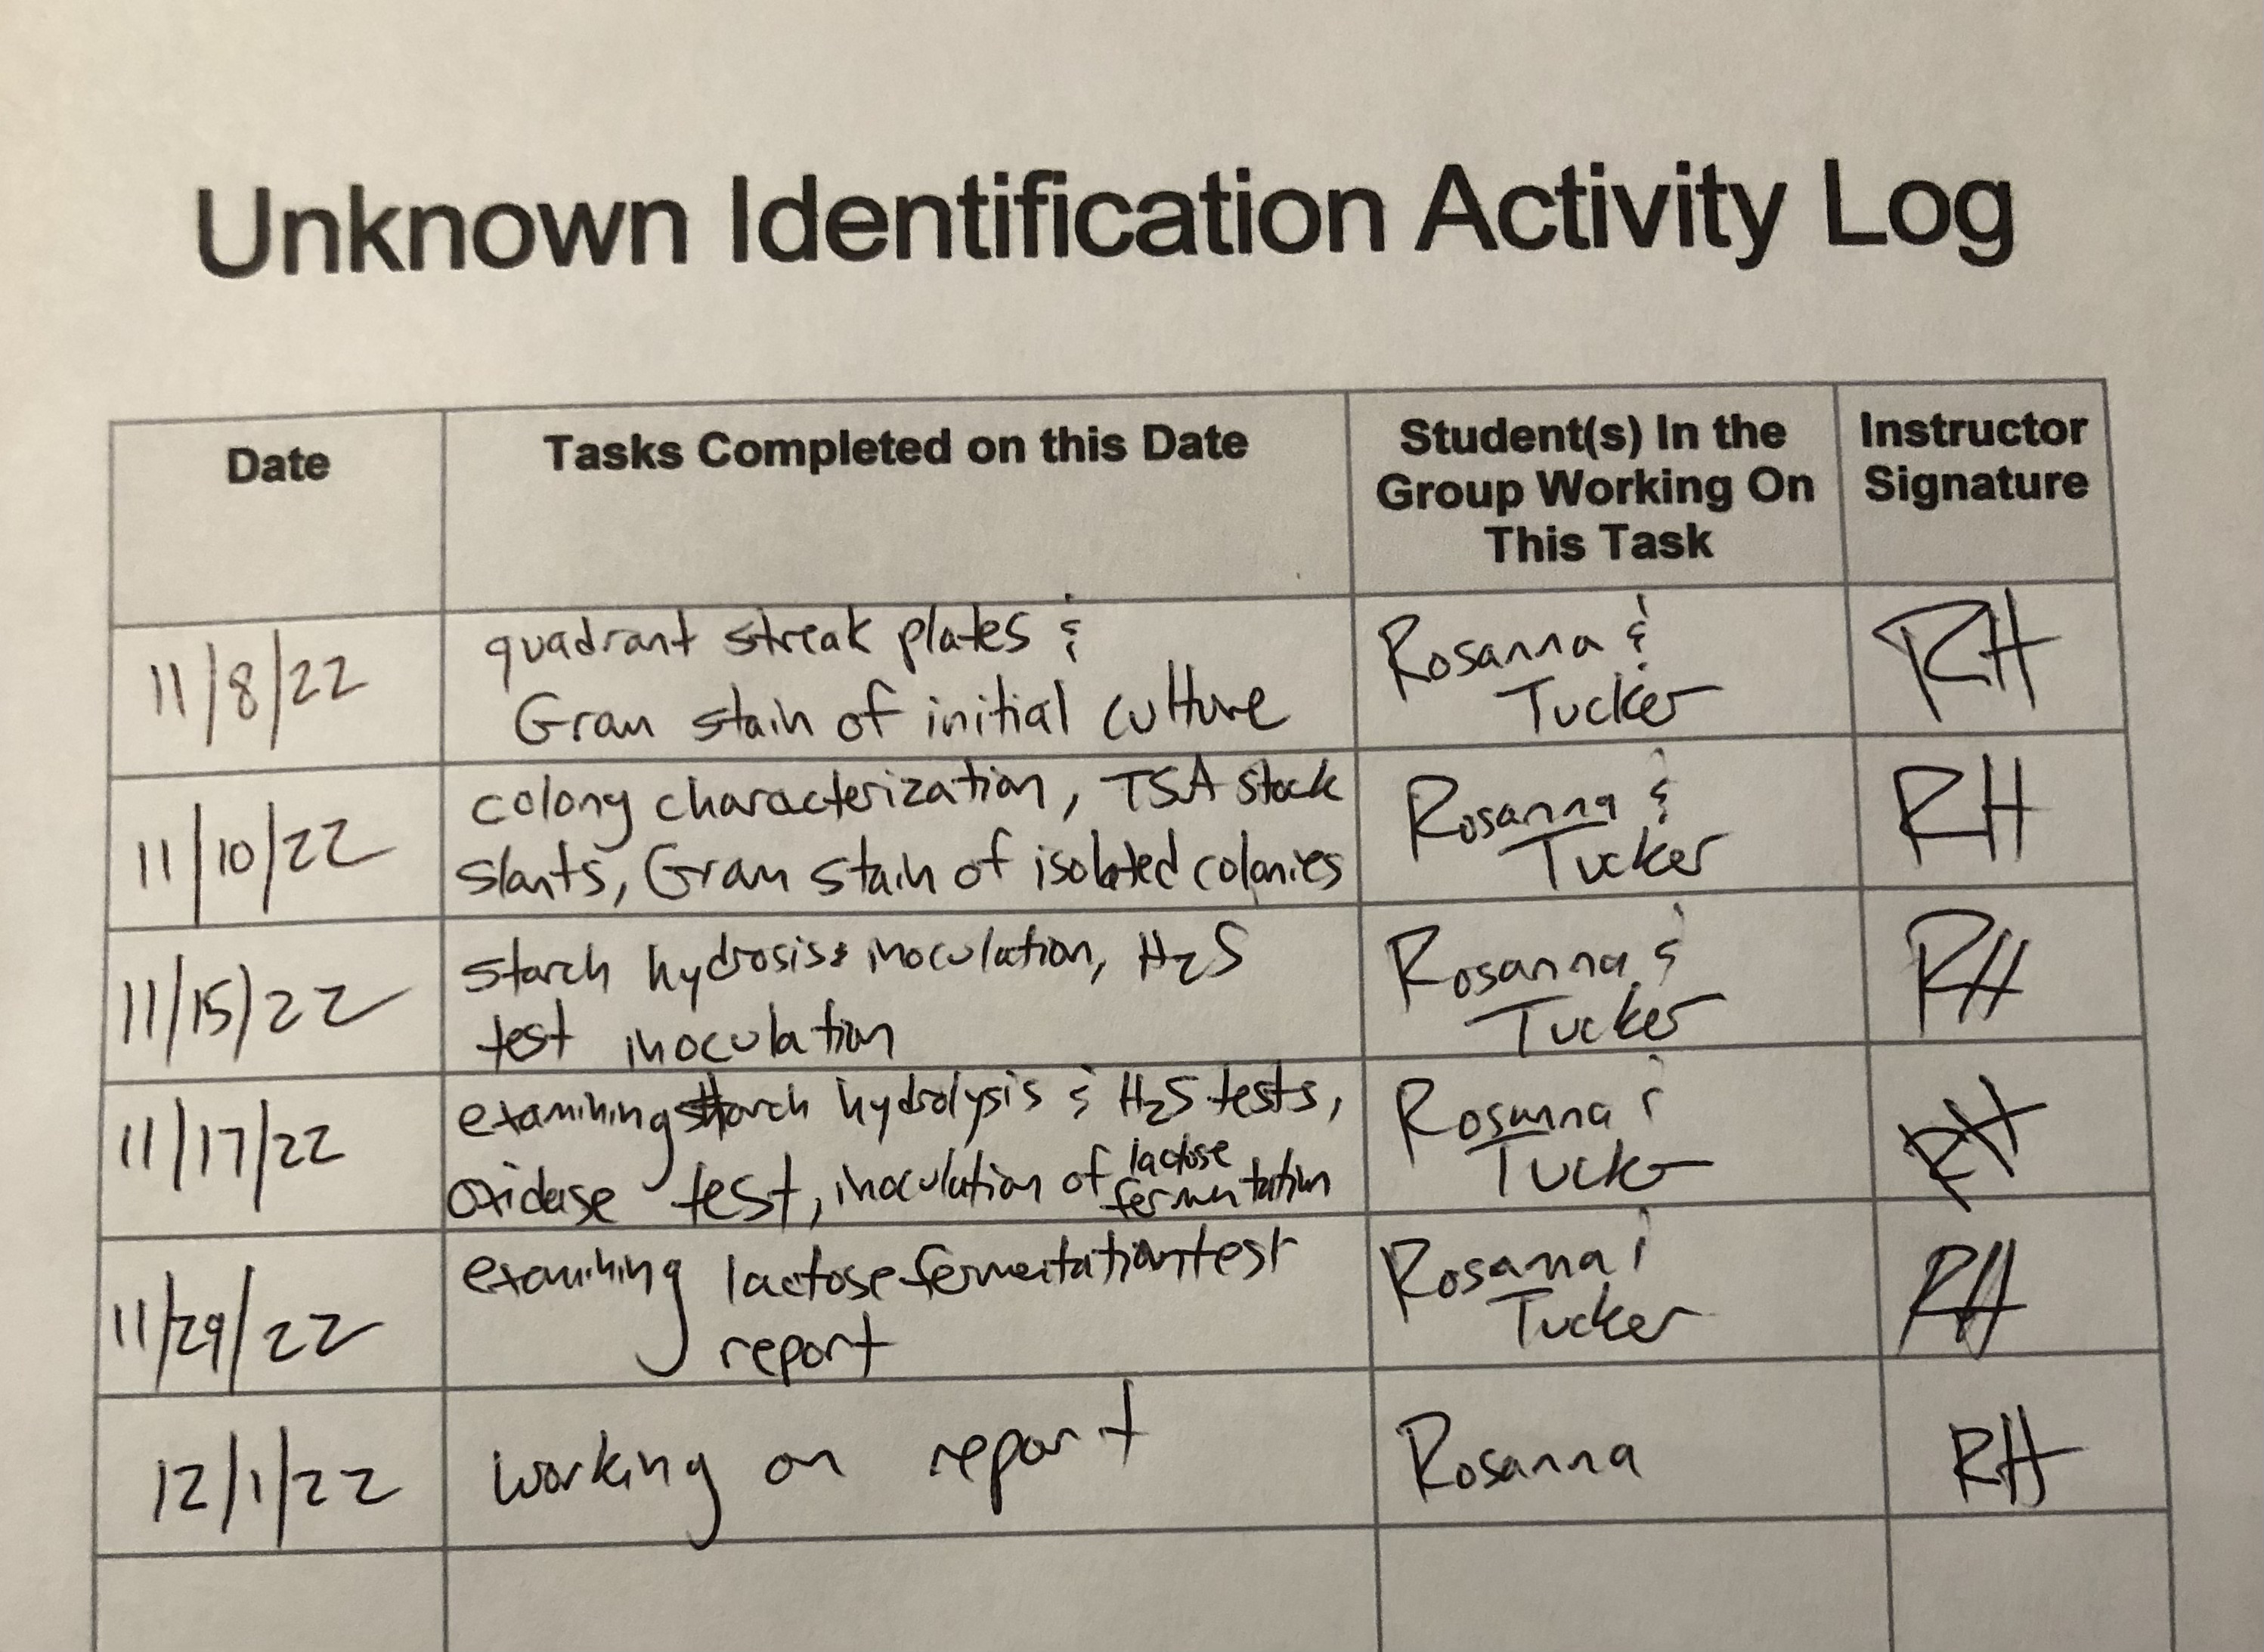 photo of completed activity log